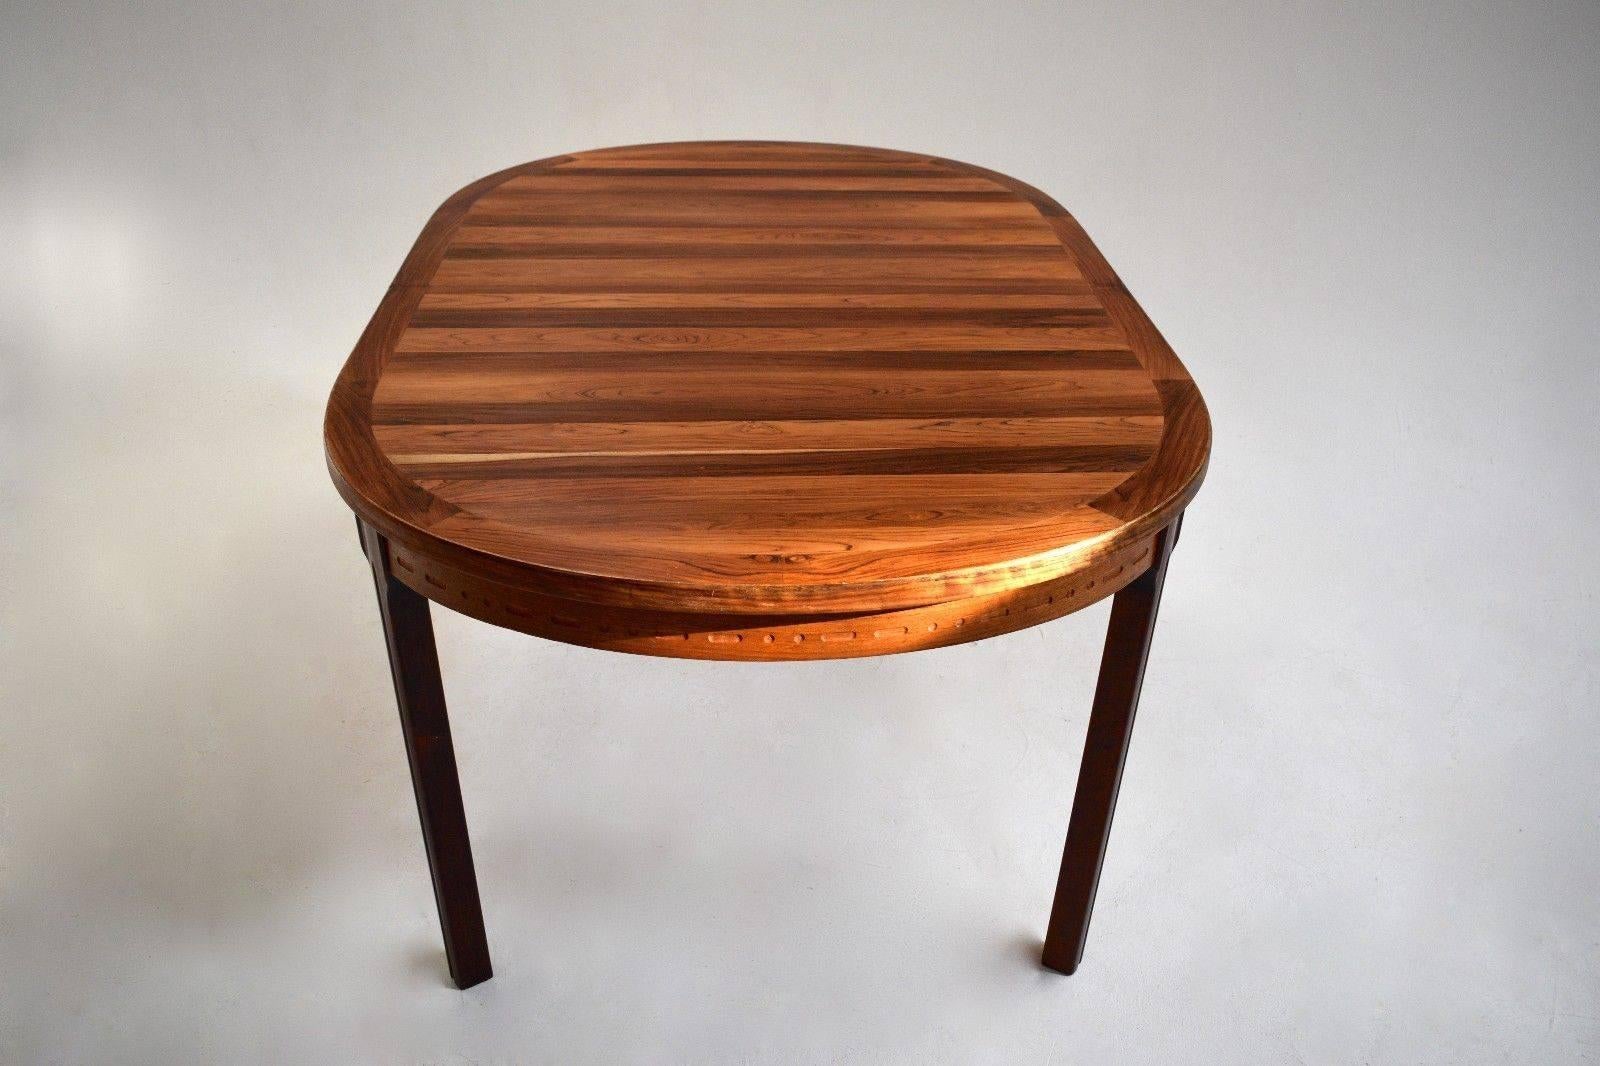 A beautiful Swedish rosewood dining table designed by Nils Jonsson for Troeds, this would make a stylish addition to any dining area. 

The table has a cross grain border and detailing around the skirt. A striking piece of classically designed